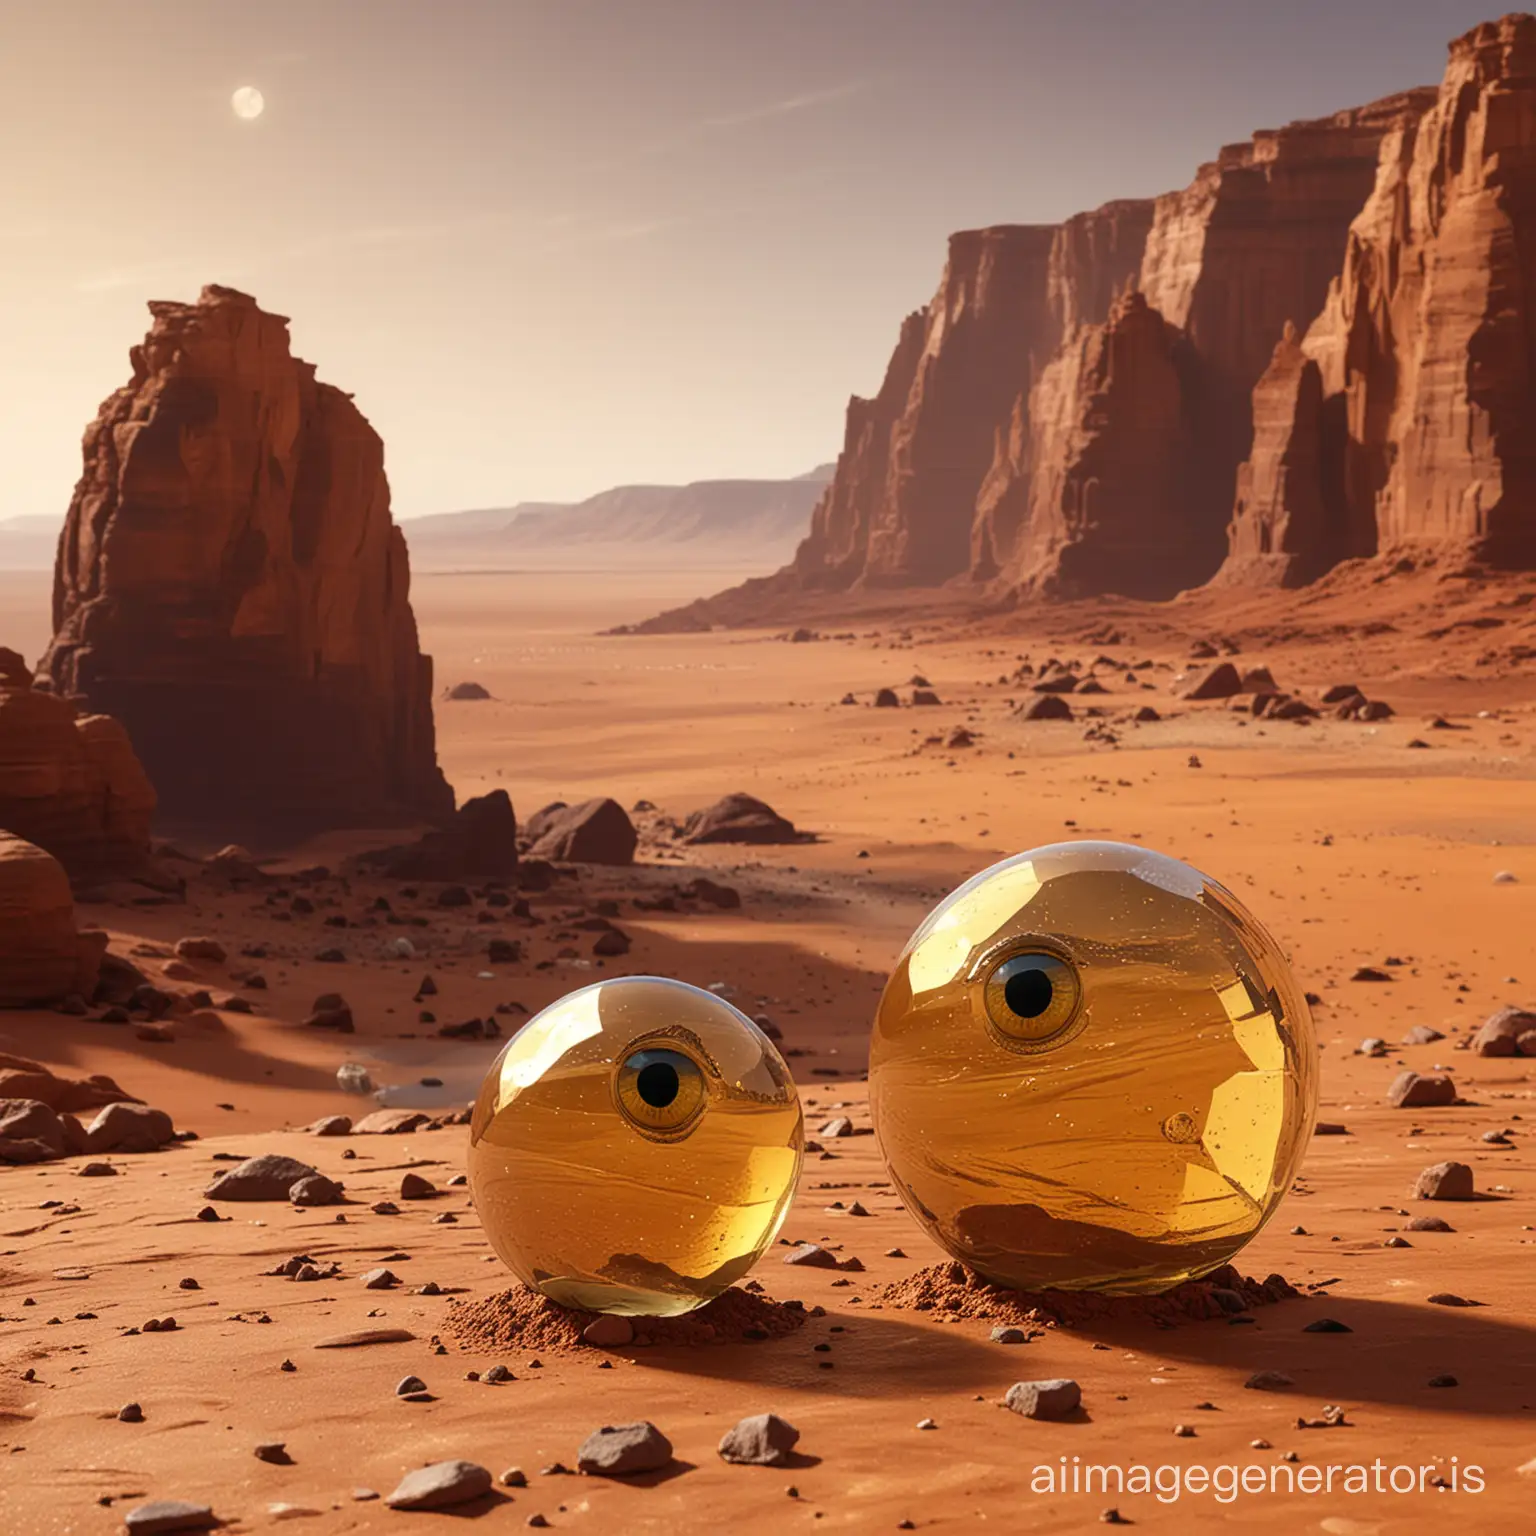 generate a house of crystal pillars on the planet Mars by the edge of an empty sea which is in the back ground. In a close-up, generate two little martian not happy with brownish skin with yellow coin eyes